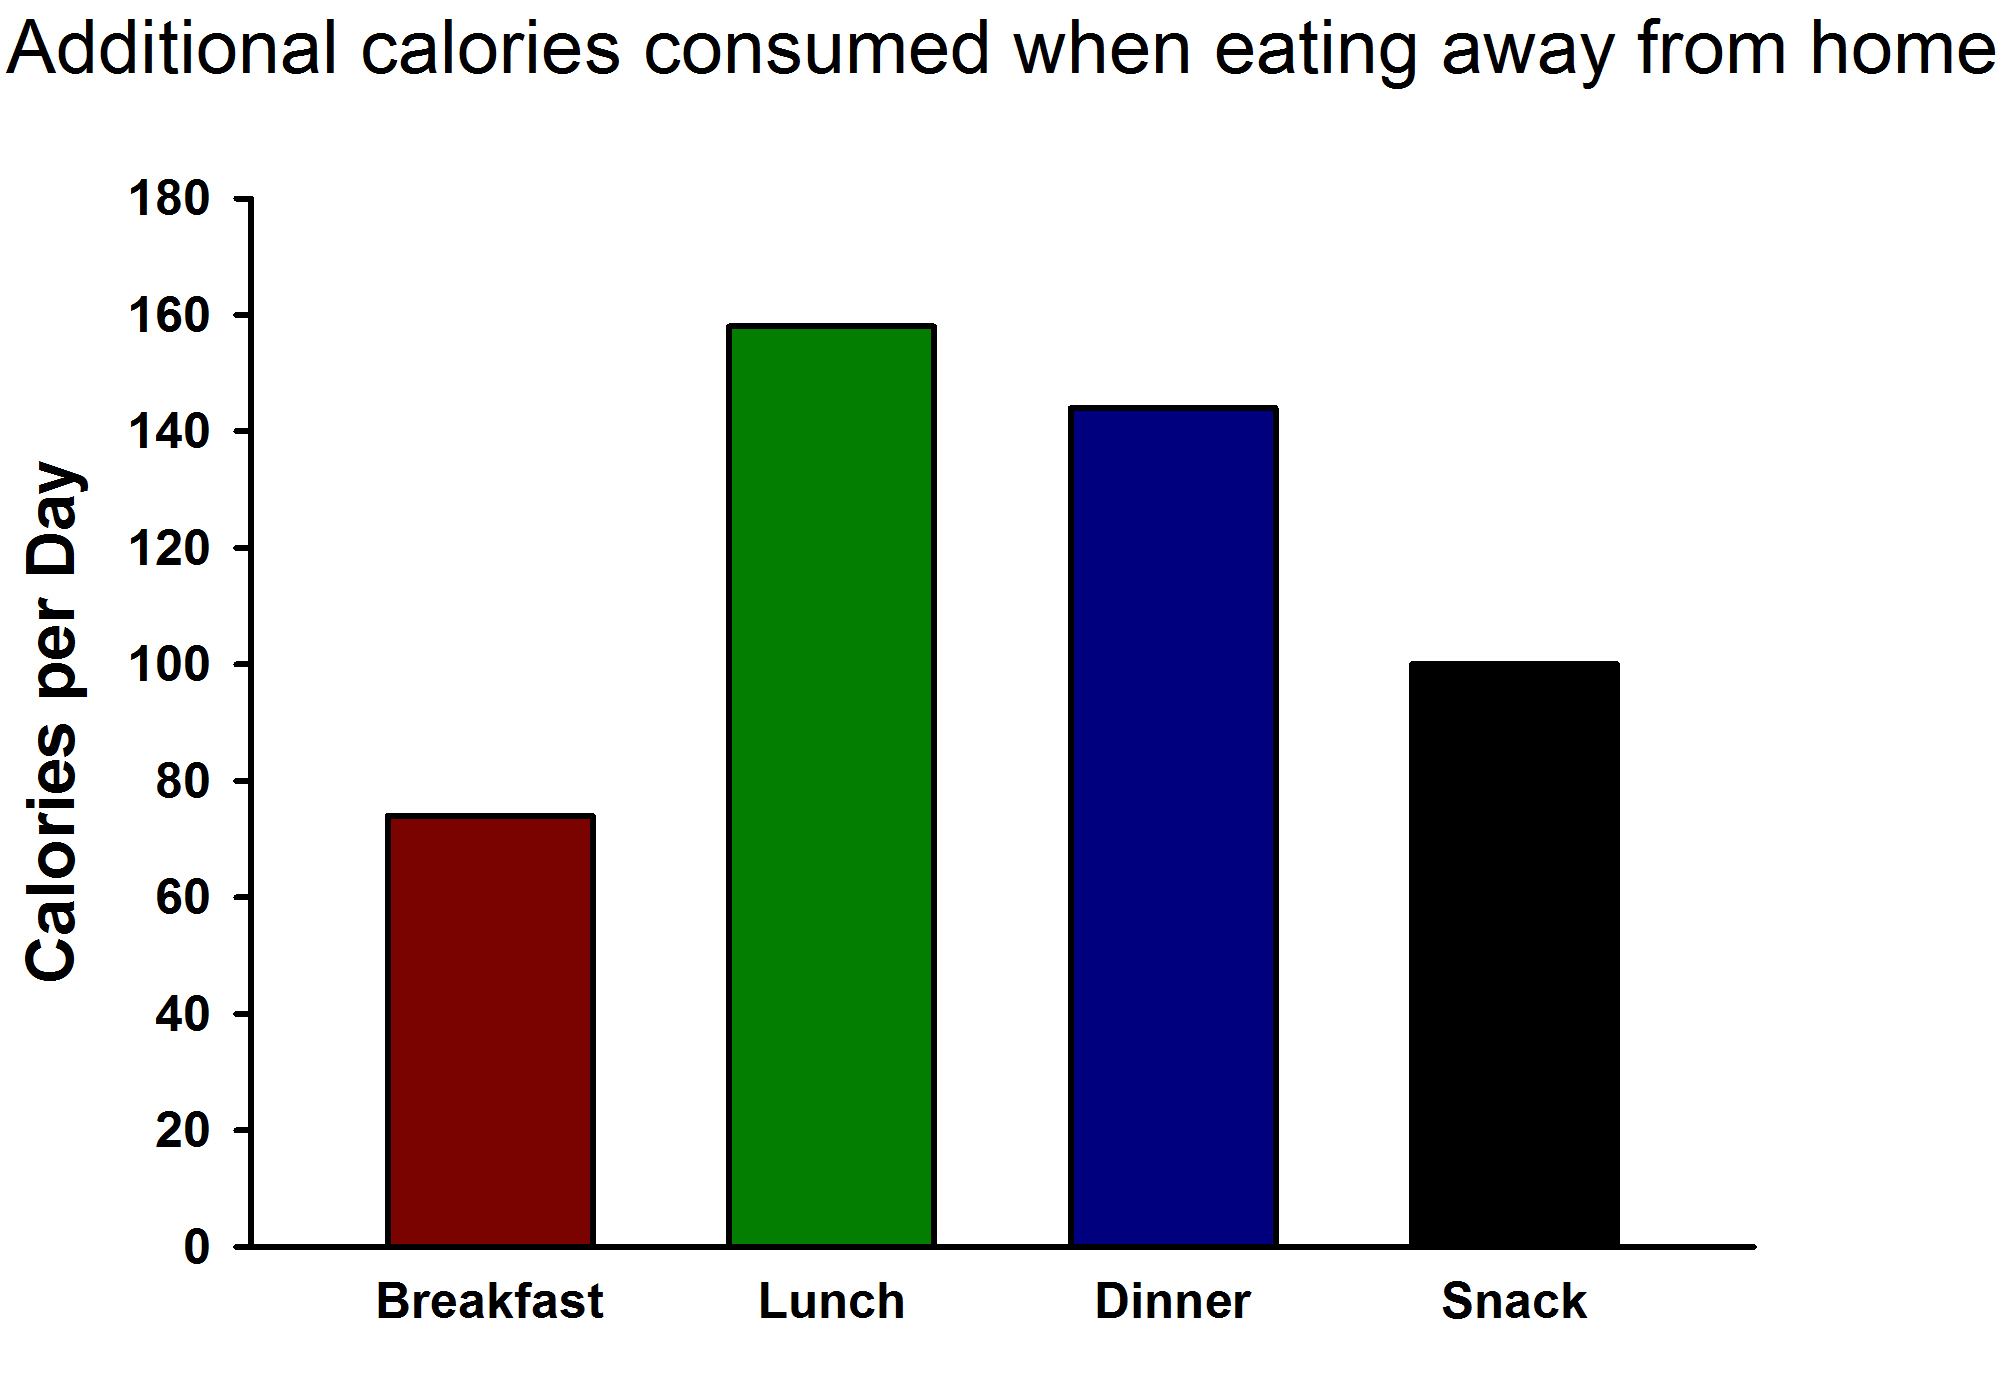 Additional Calories Consumed Away from the Home compared to Food Prepared in the Home